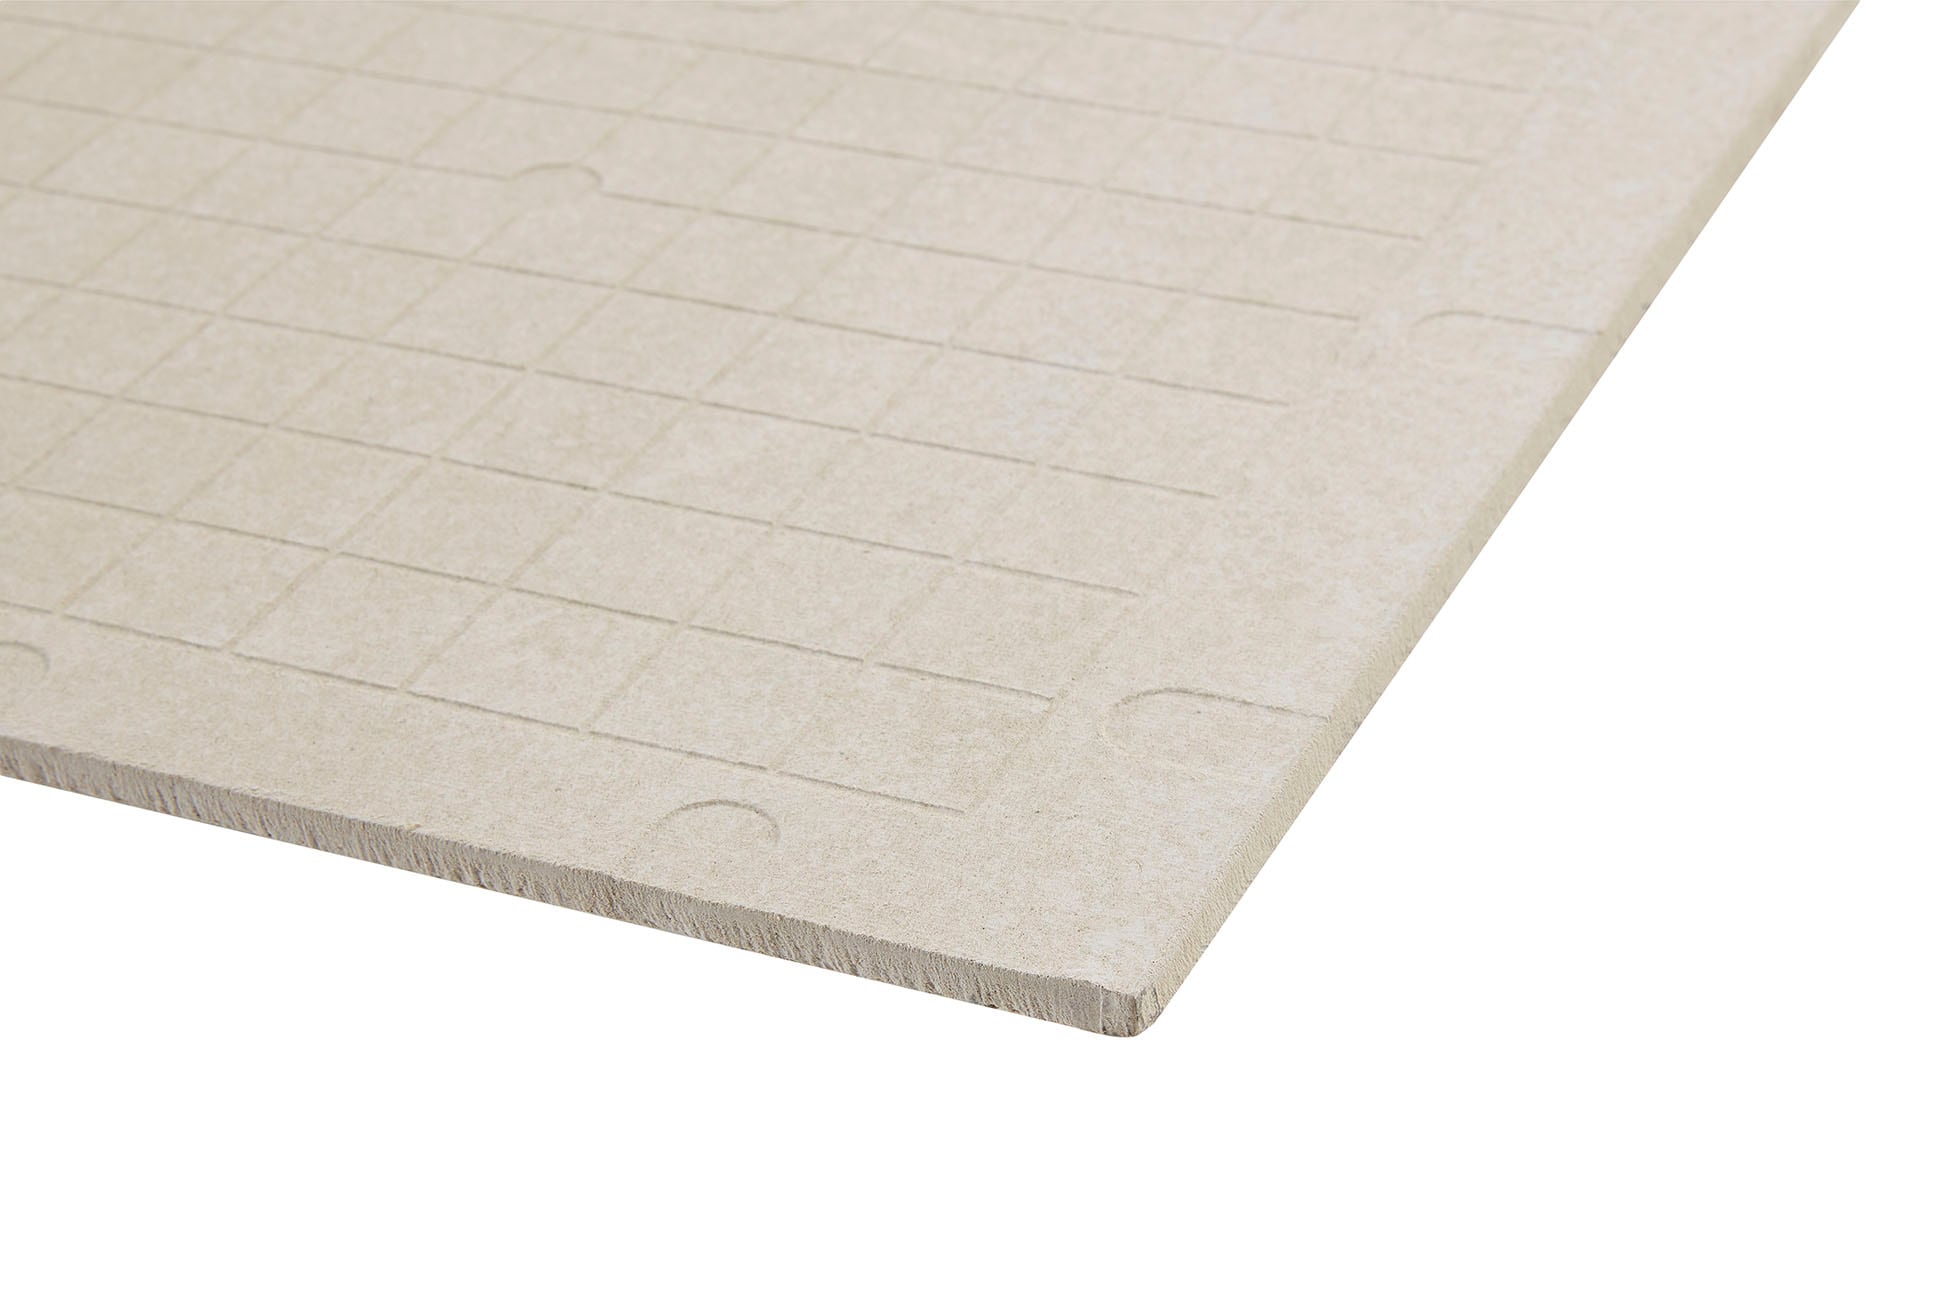 Mat Board Center, Pack of 10 1/8 White Foam Core Backing Boards (5x7, White)  